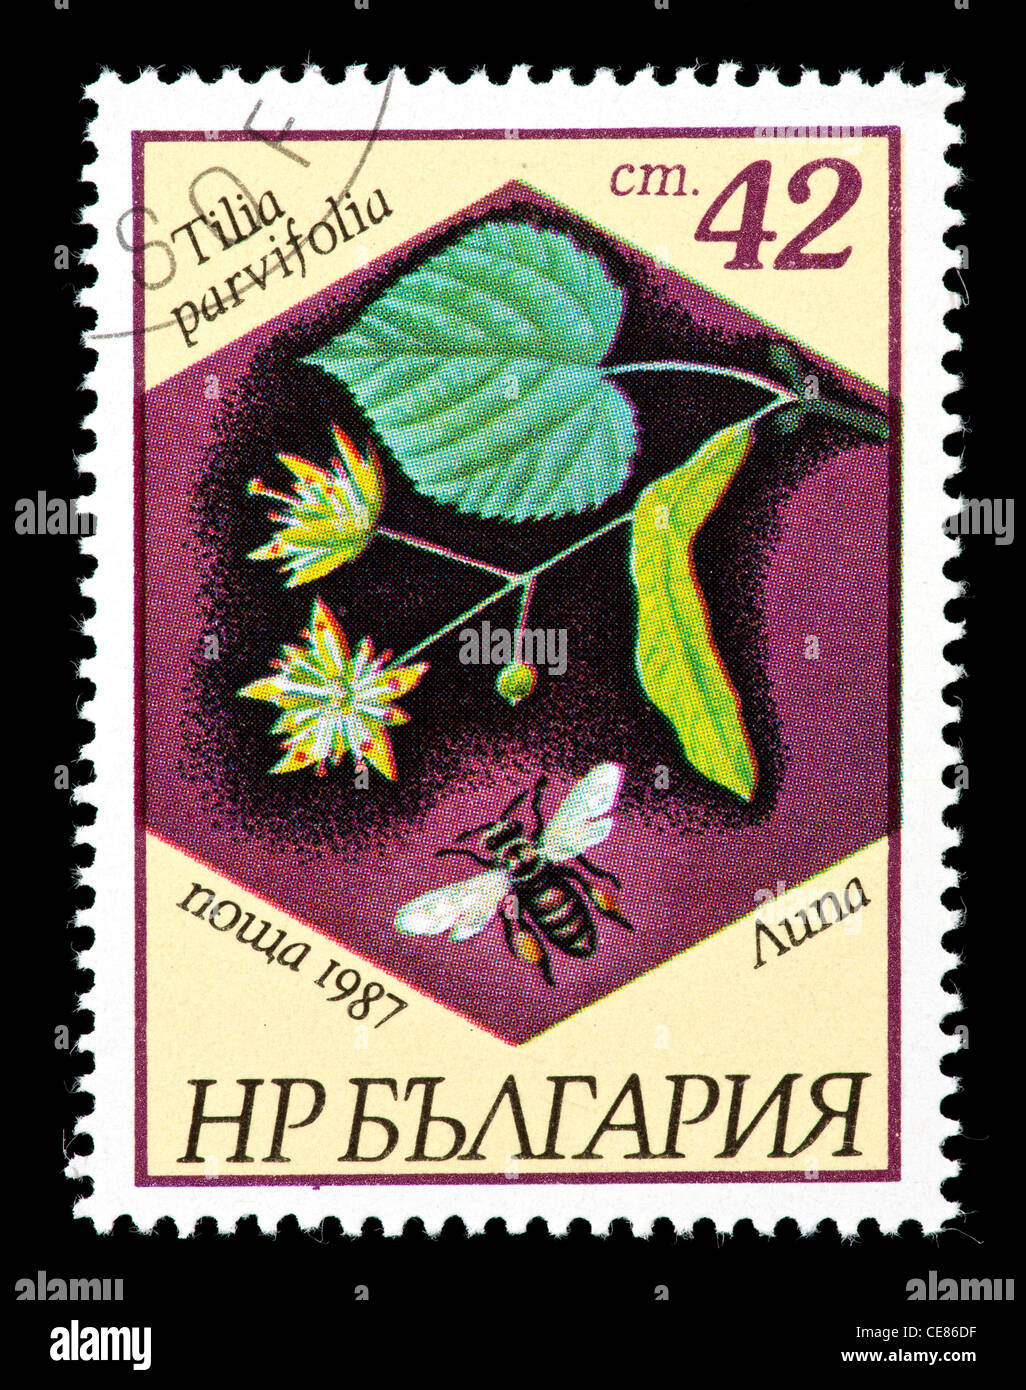 Postage stamp from Bulgaria depicting a bee and a flower (Tilia parvifolia). Stock Photo